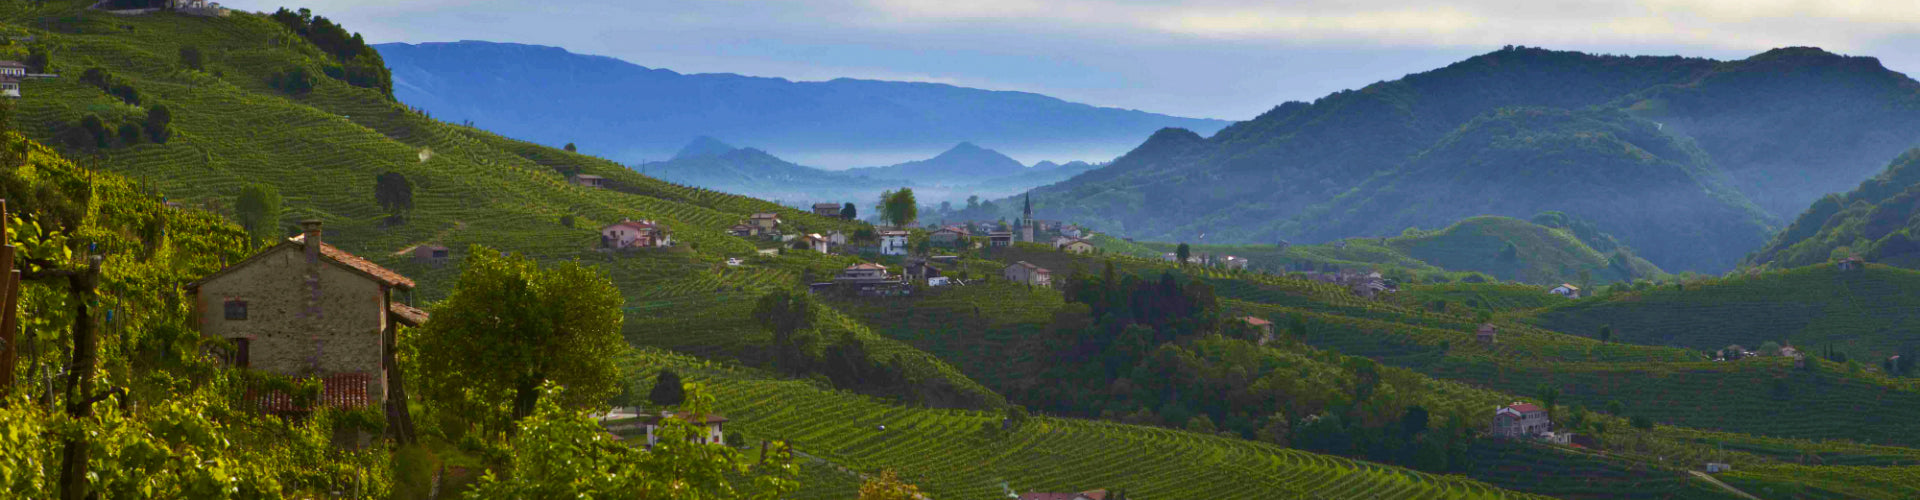 Le Colture Prosecco Vineyards Italy